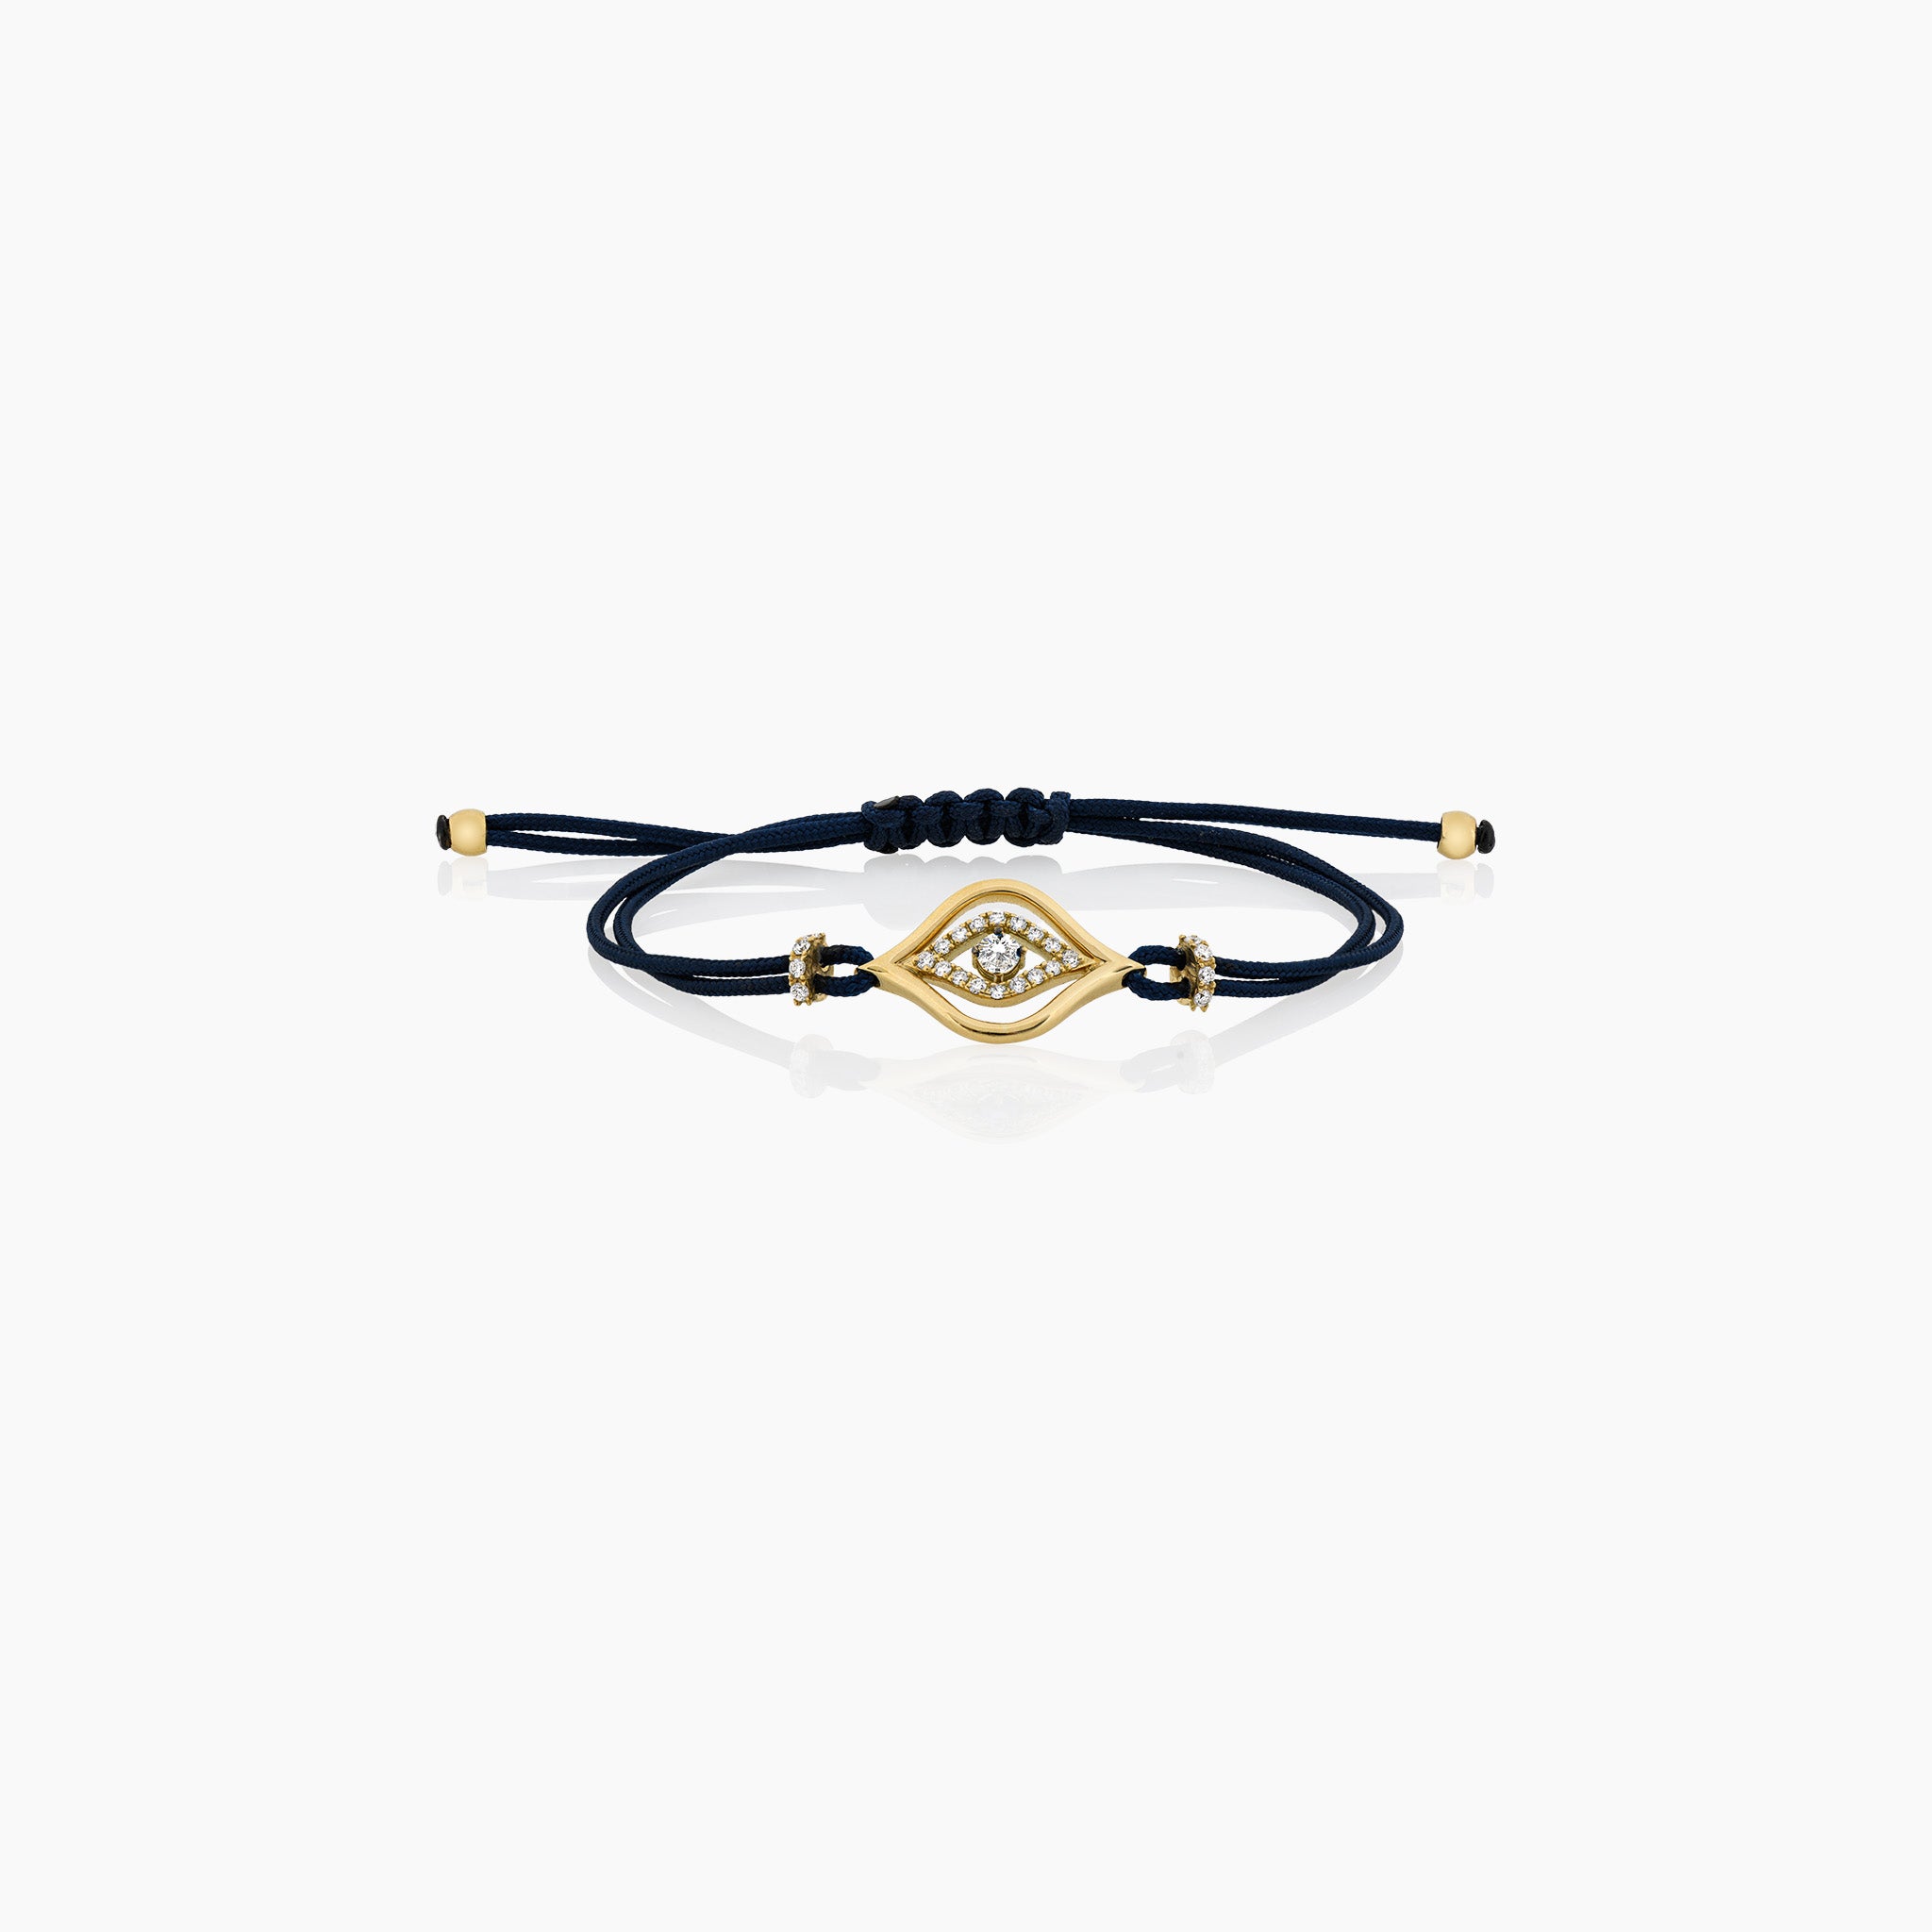 A stylish evil eye cord bracelet featuring diamonds, set on a cord, presented against an off-white background. 